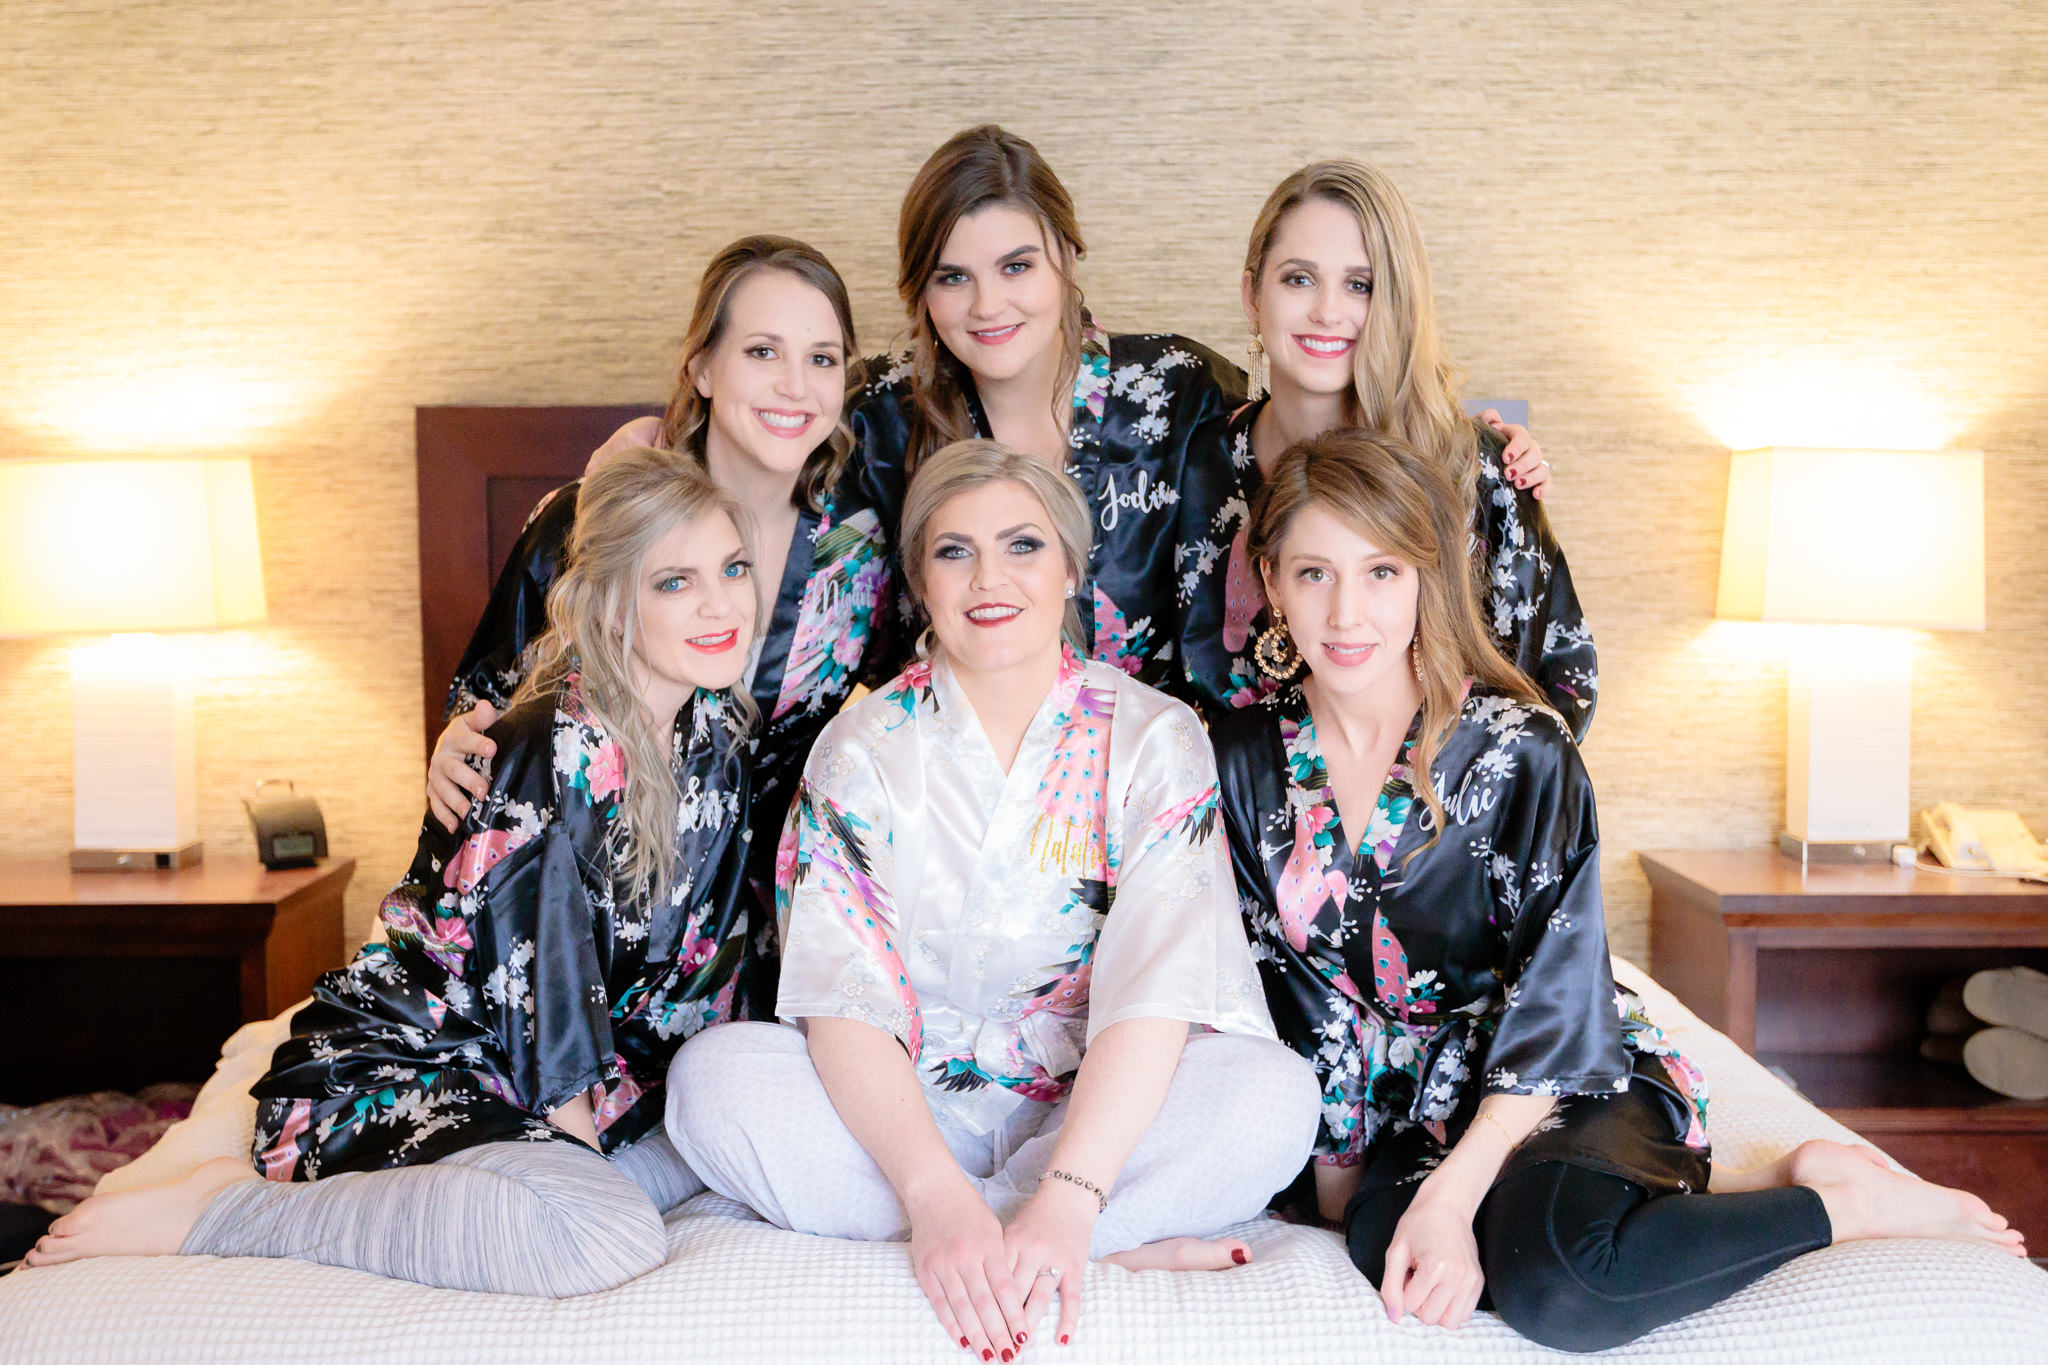 Bride & bridesmaids together in silk kimonos before a Soldiers & Sailors wedding